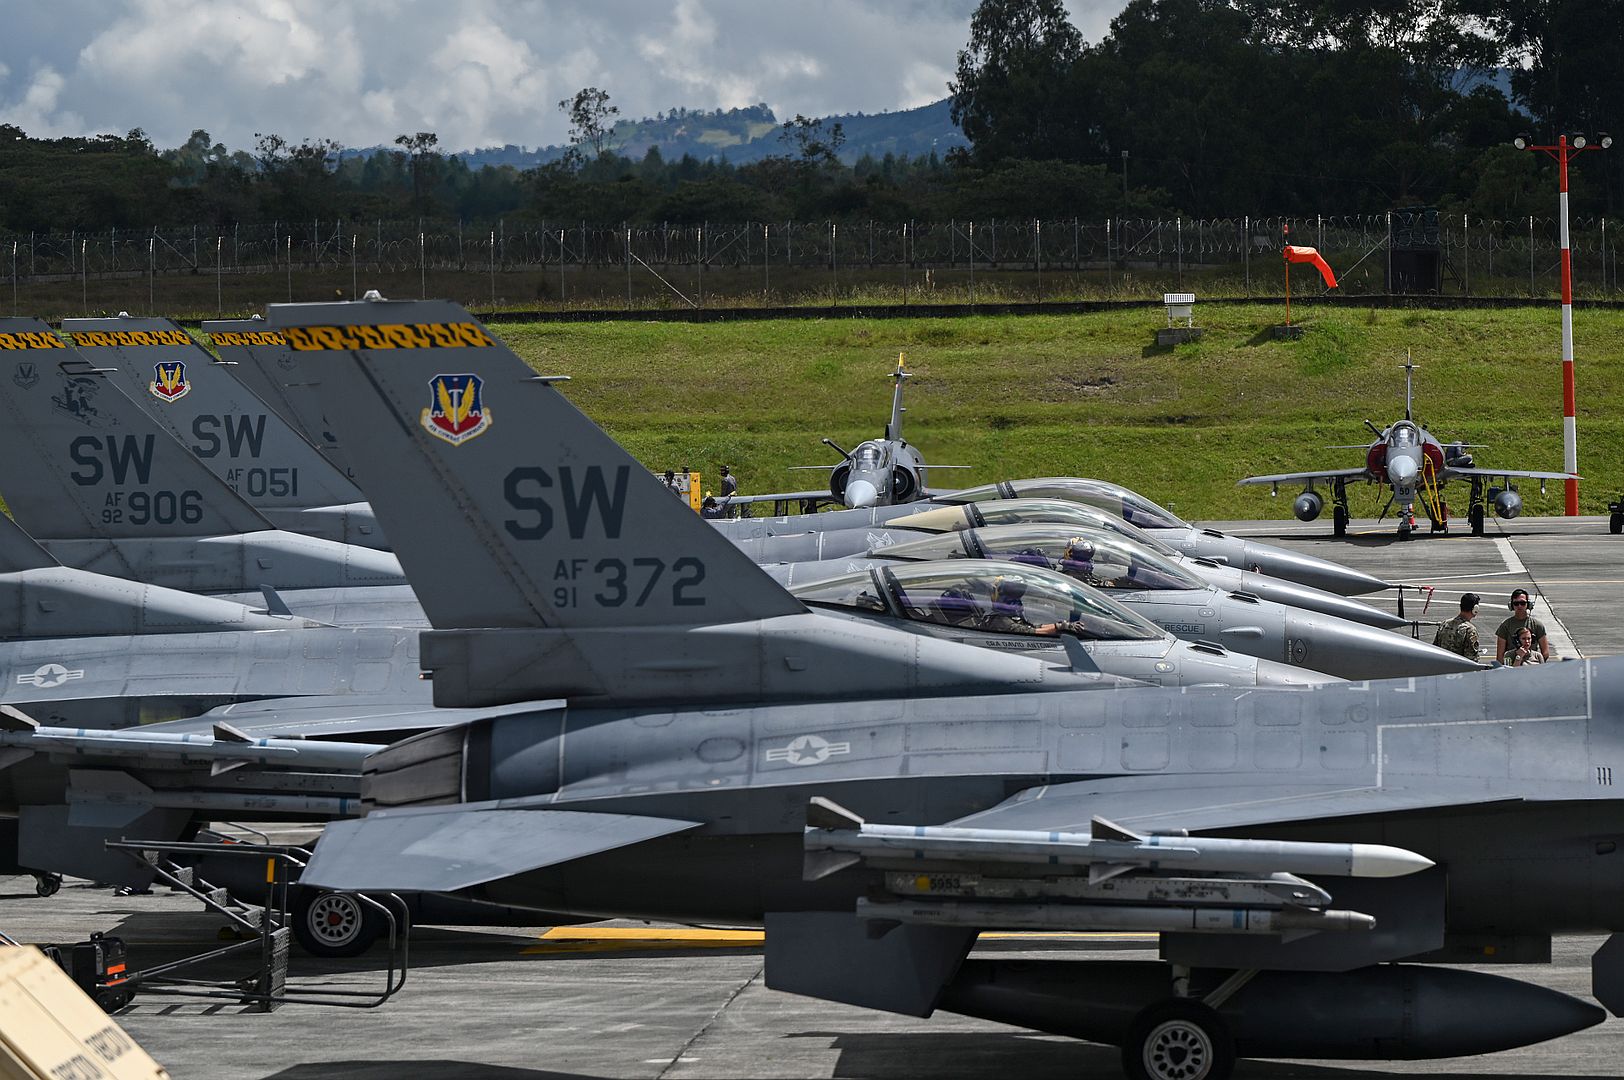 16 Fighting Falcon Assigned To The 79th Expeditionary Fighter Squadron Taxis Before Take Off From Comando Aereo De Combate Number 5